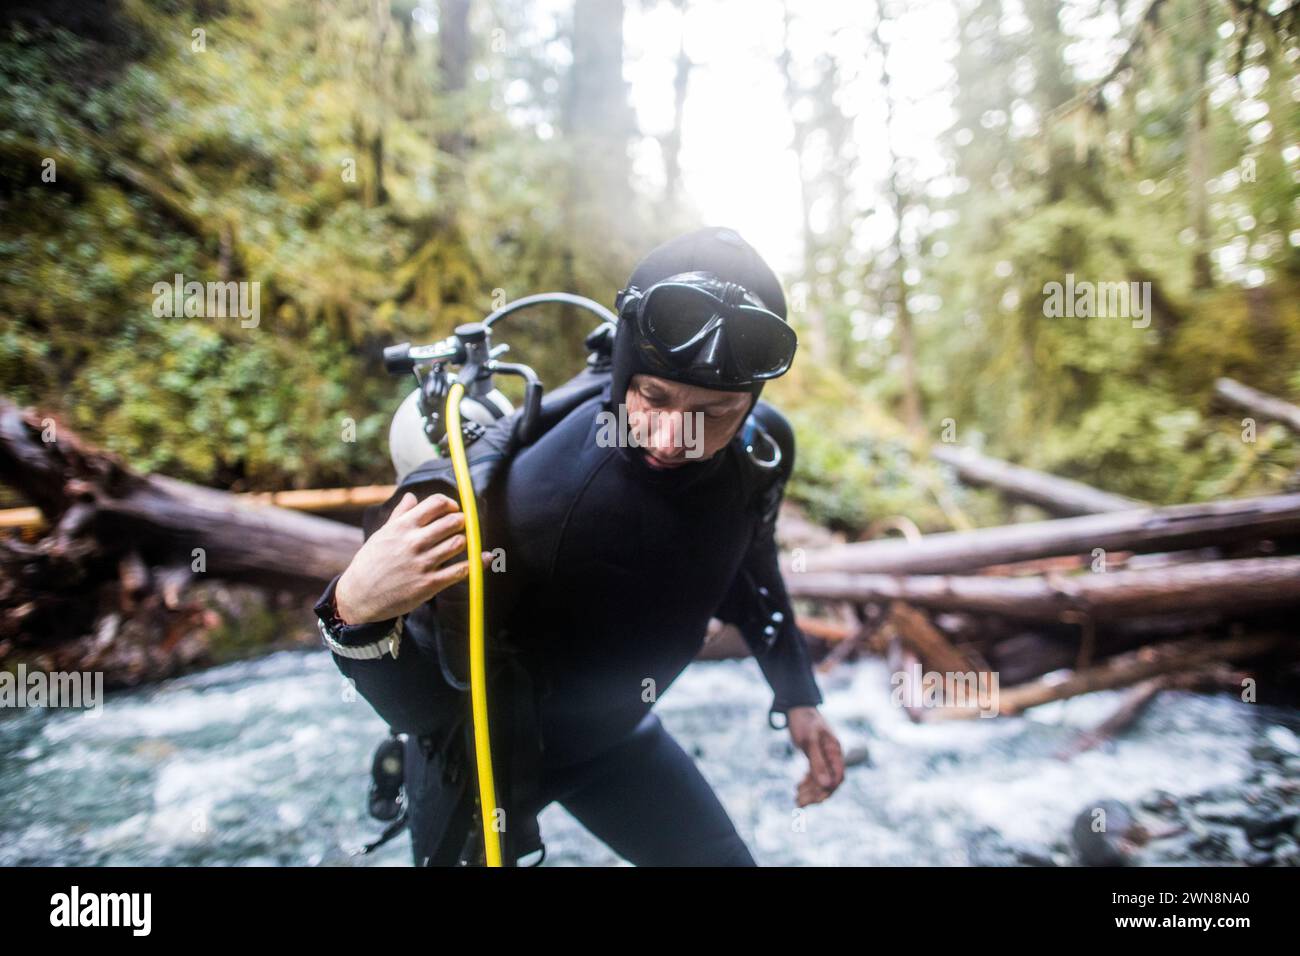 Suba diver puts on BCD, air tank and equipment Stock Photo